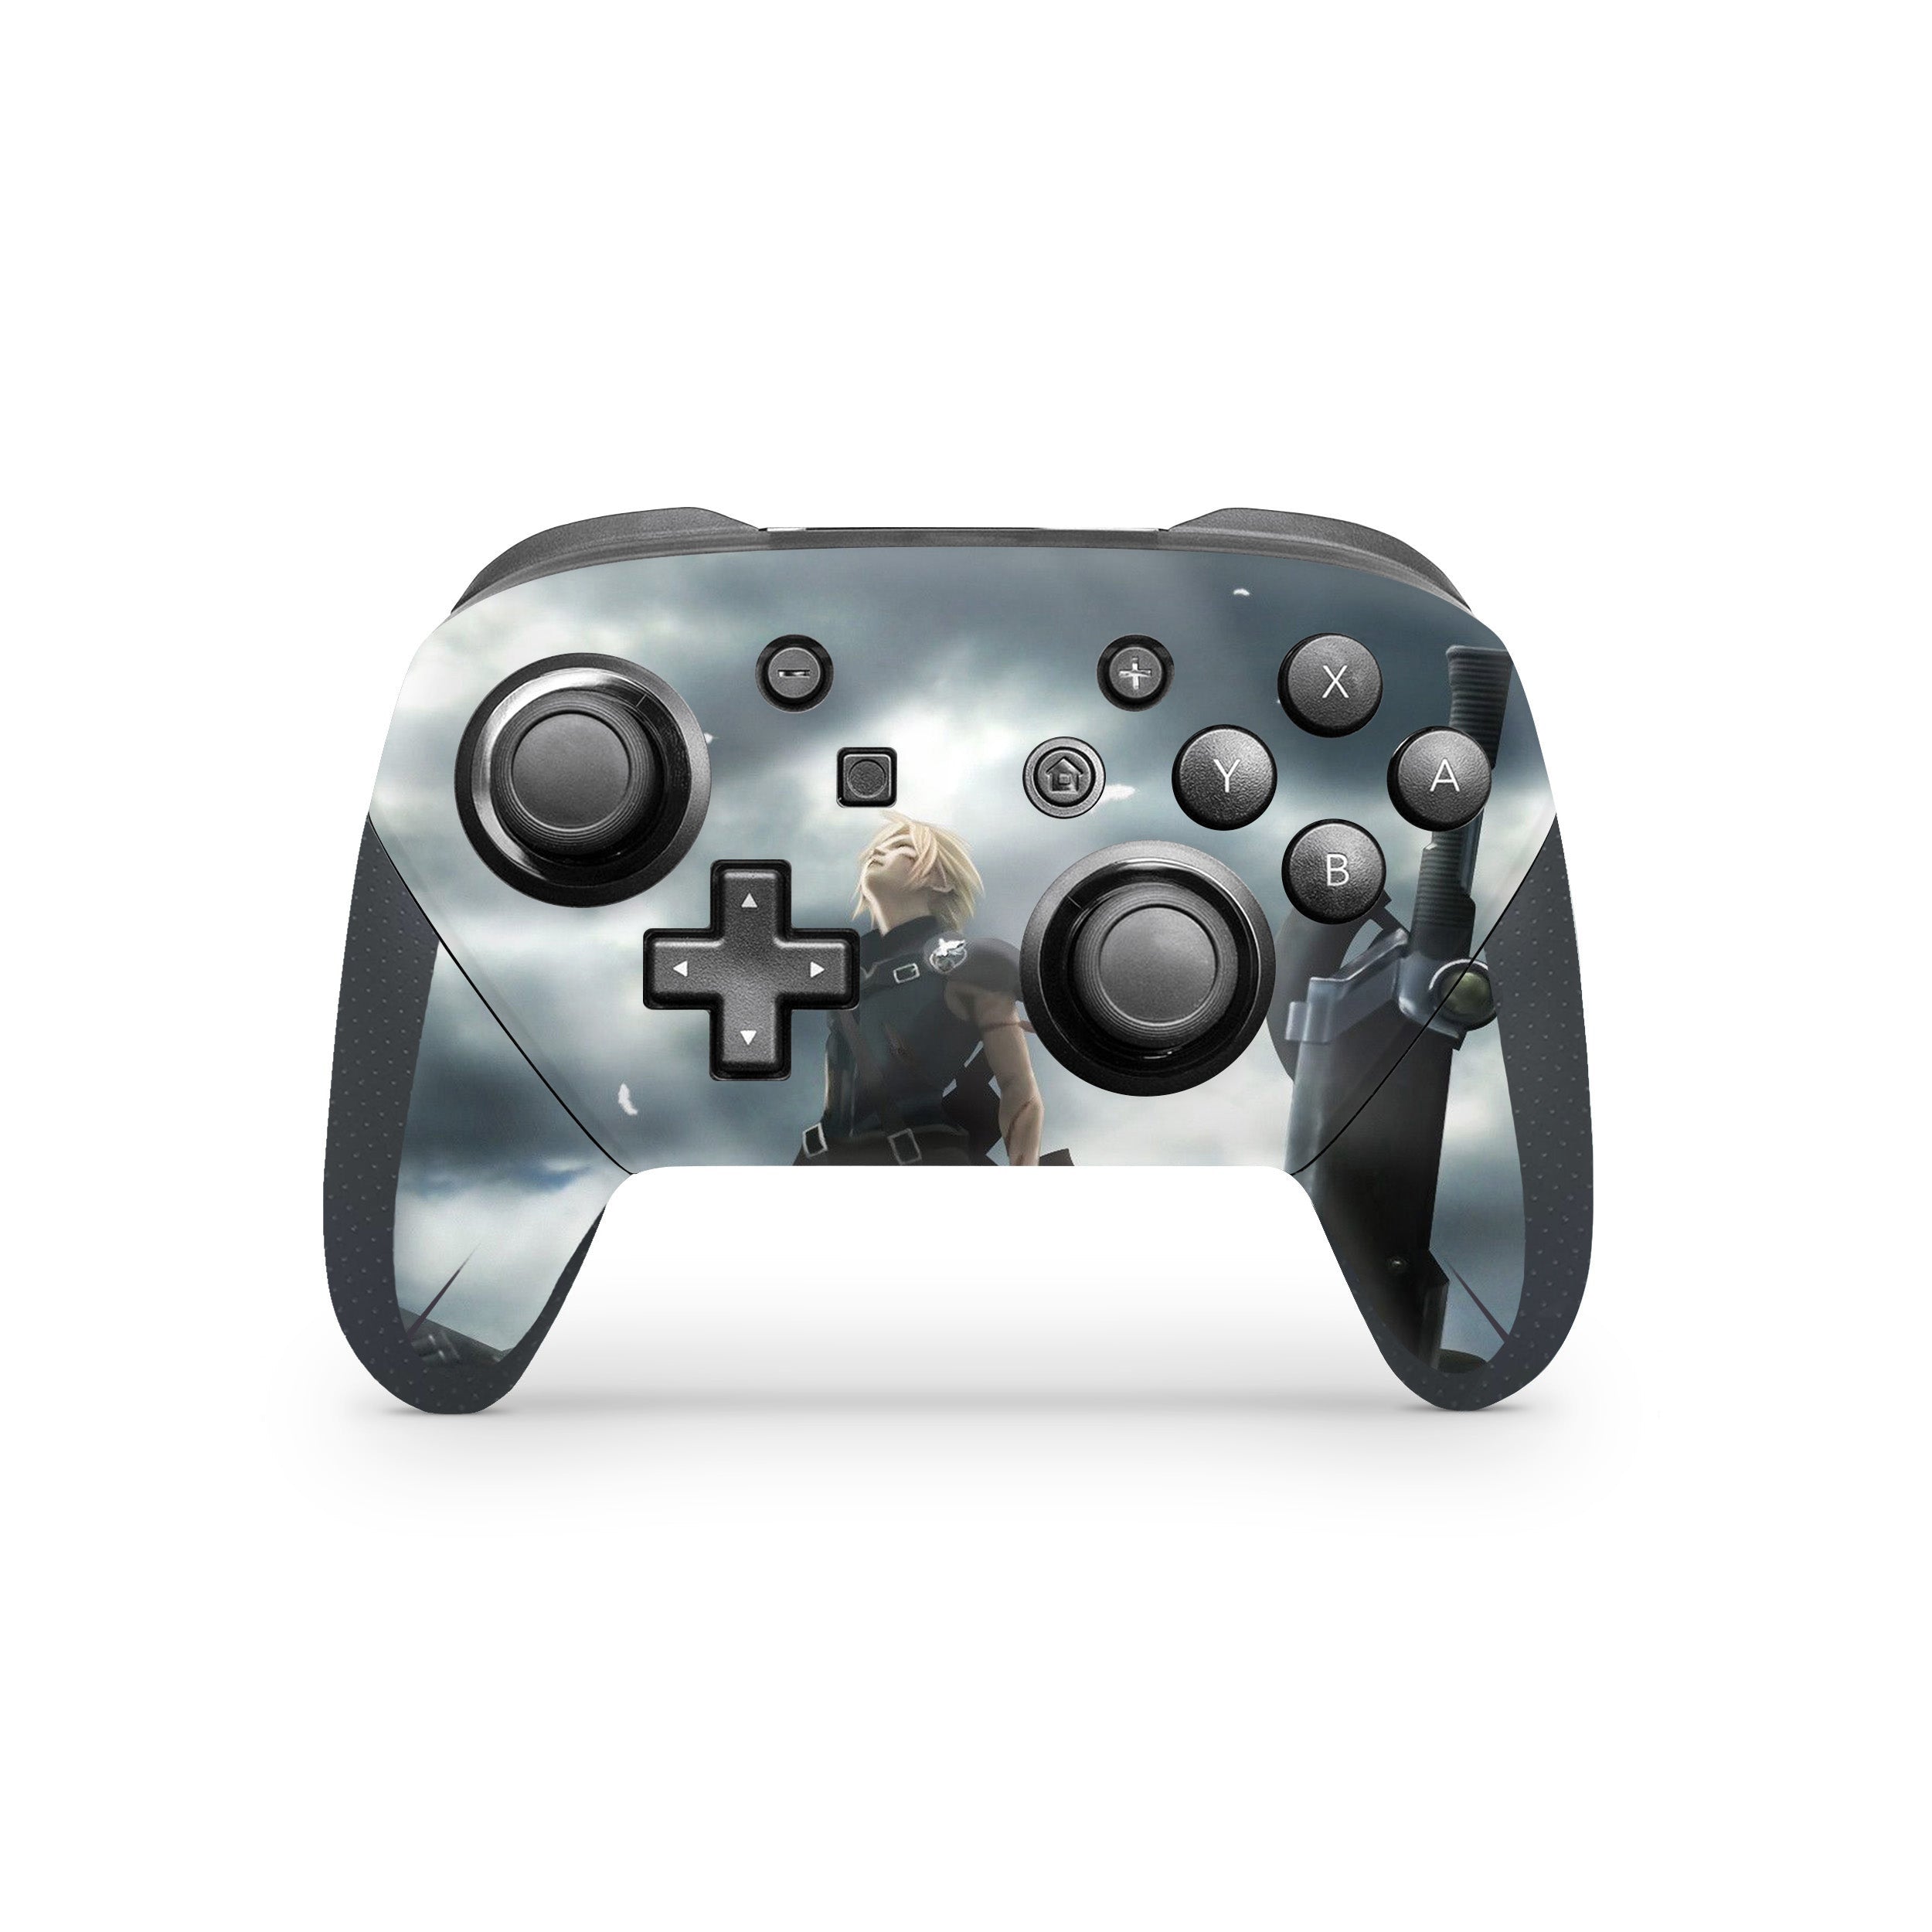 A video game skin featuring a Final Fantasy 7 Cloud Reborn design for the Switch Pro Controller.